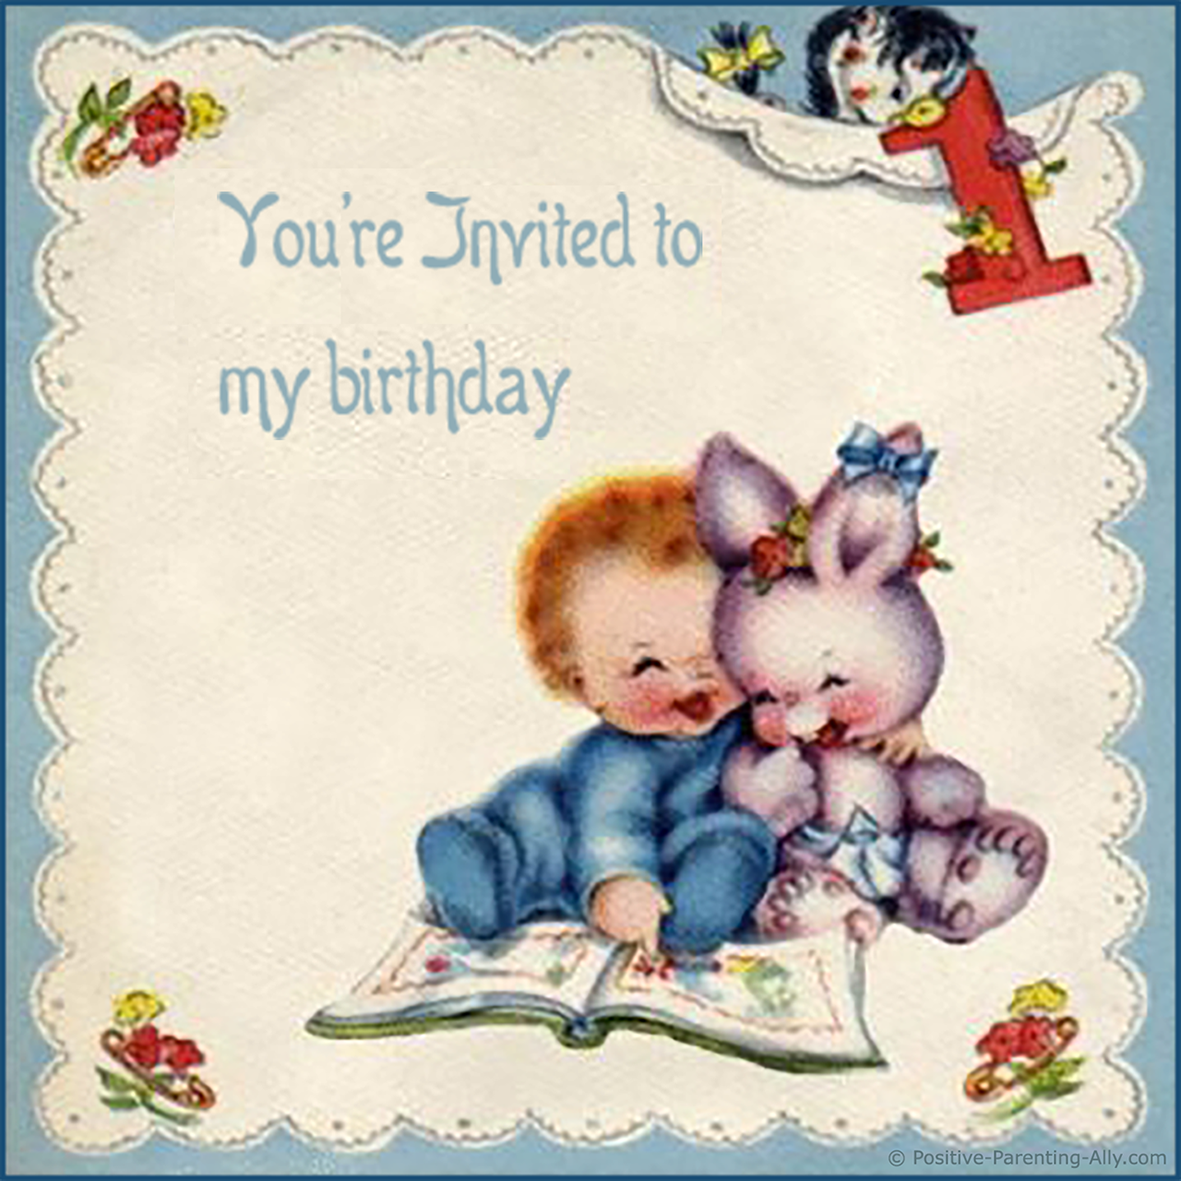 Vintage birthday invitation for first birthday with a cute baby boy reading a book with a rabbit.